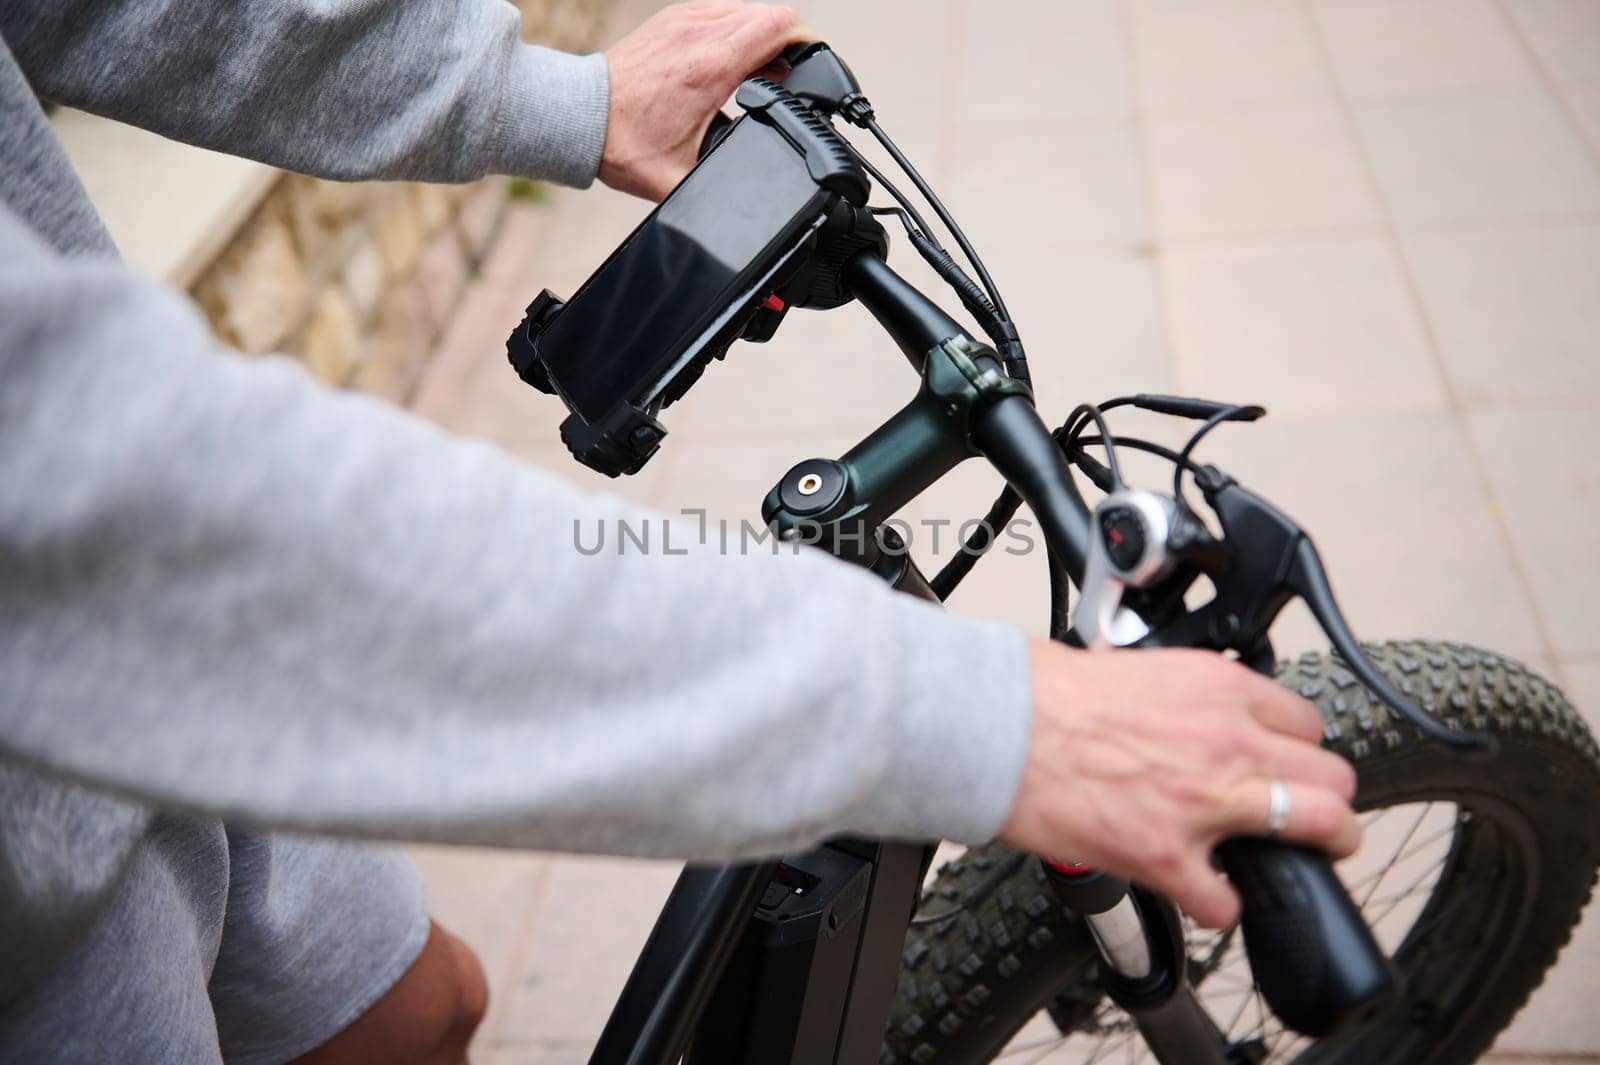 Hands on handlebar of electric bike while riding in city. Smartphone with black mockup screen copy space. Man using mobile phone, renting electric bike using rental app. Bike sharing city service